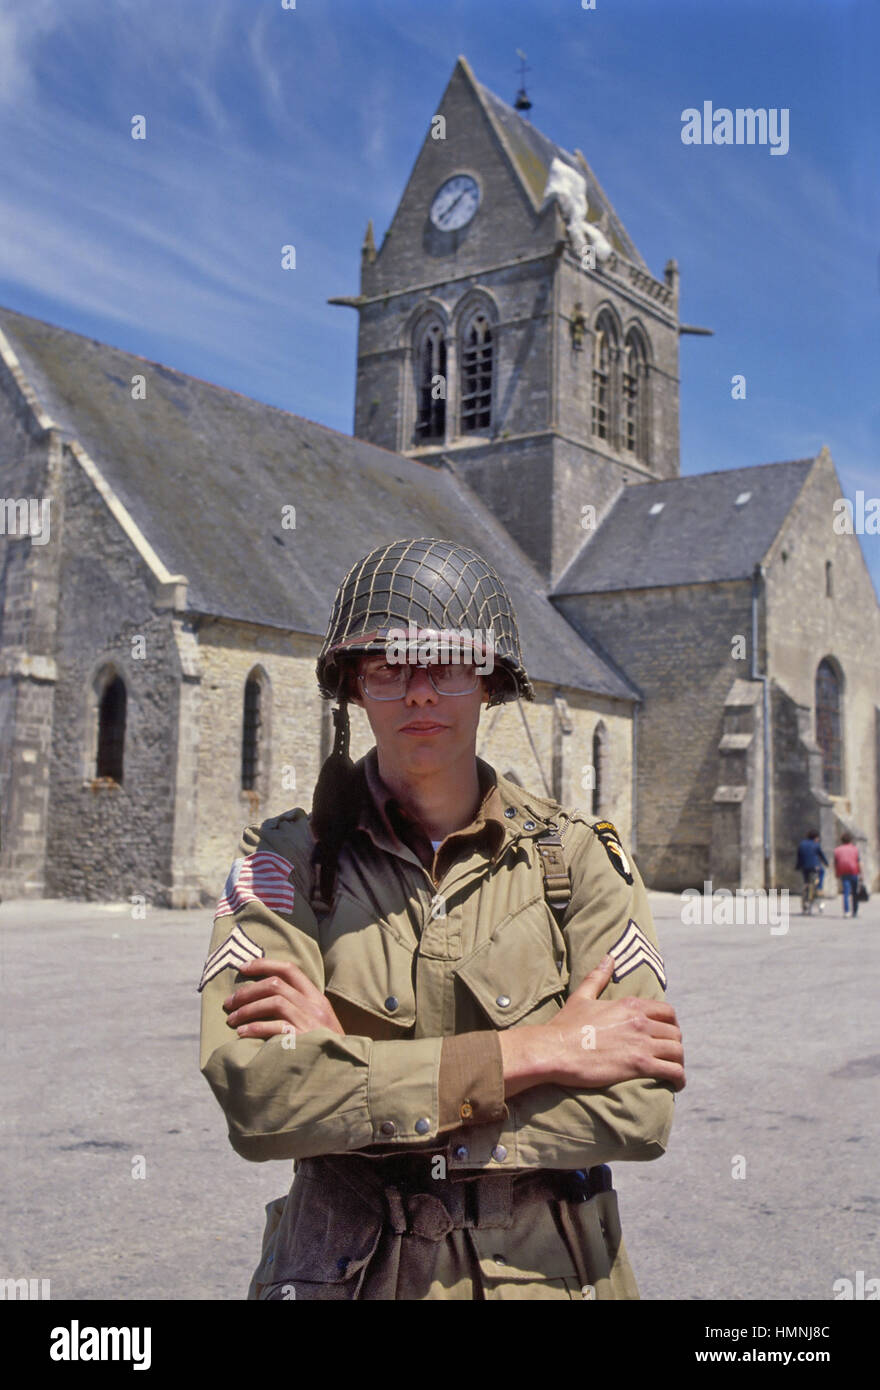 Normandy (France), war veterans and collectors of vintage military vehicles participate the yearly ceremonies for the commemoration of the allied landing of June 1944, 82nd Airborne Division paratrooper on the Saint Mere Eglise square Stock Photo